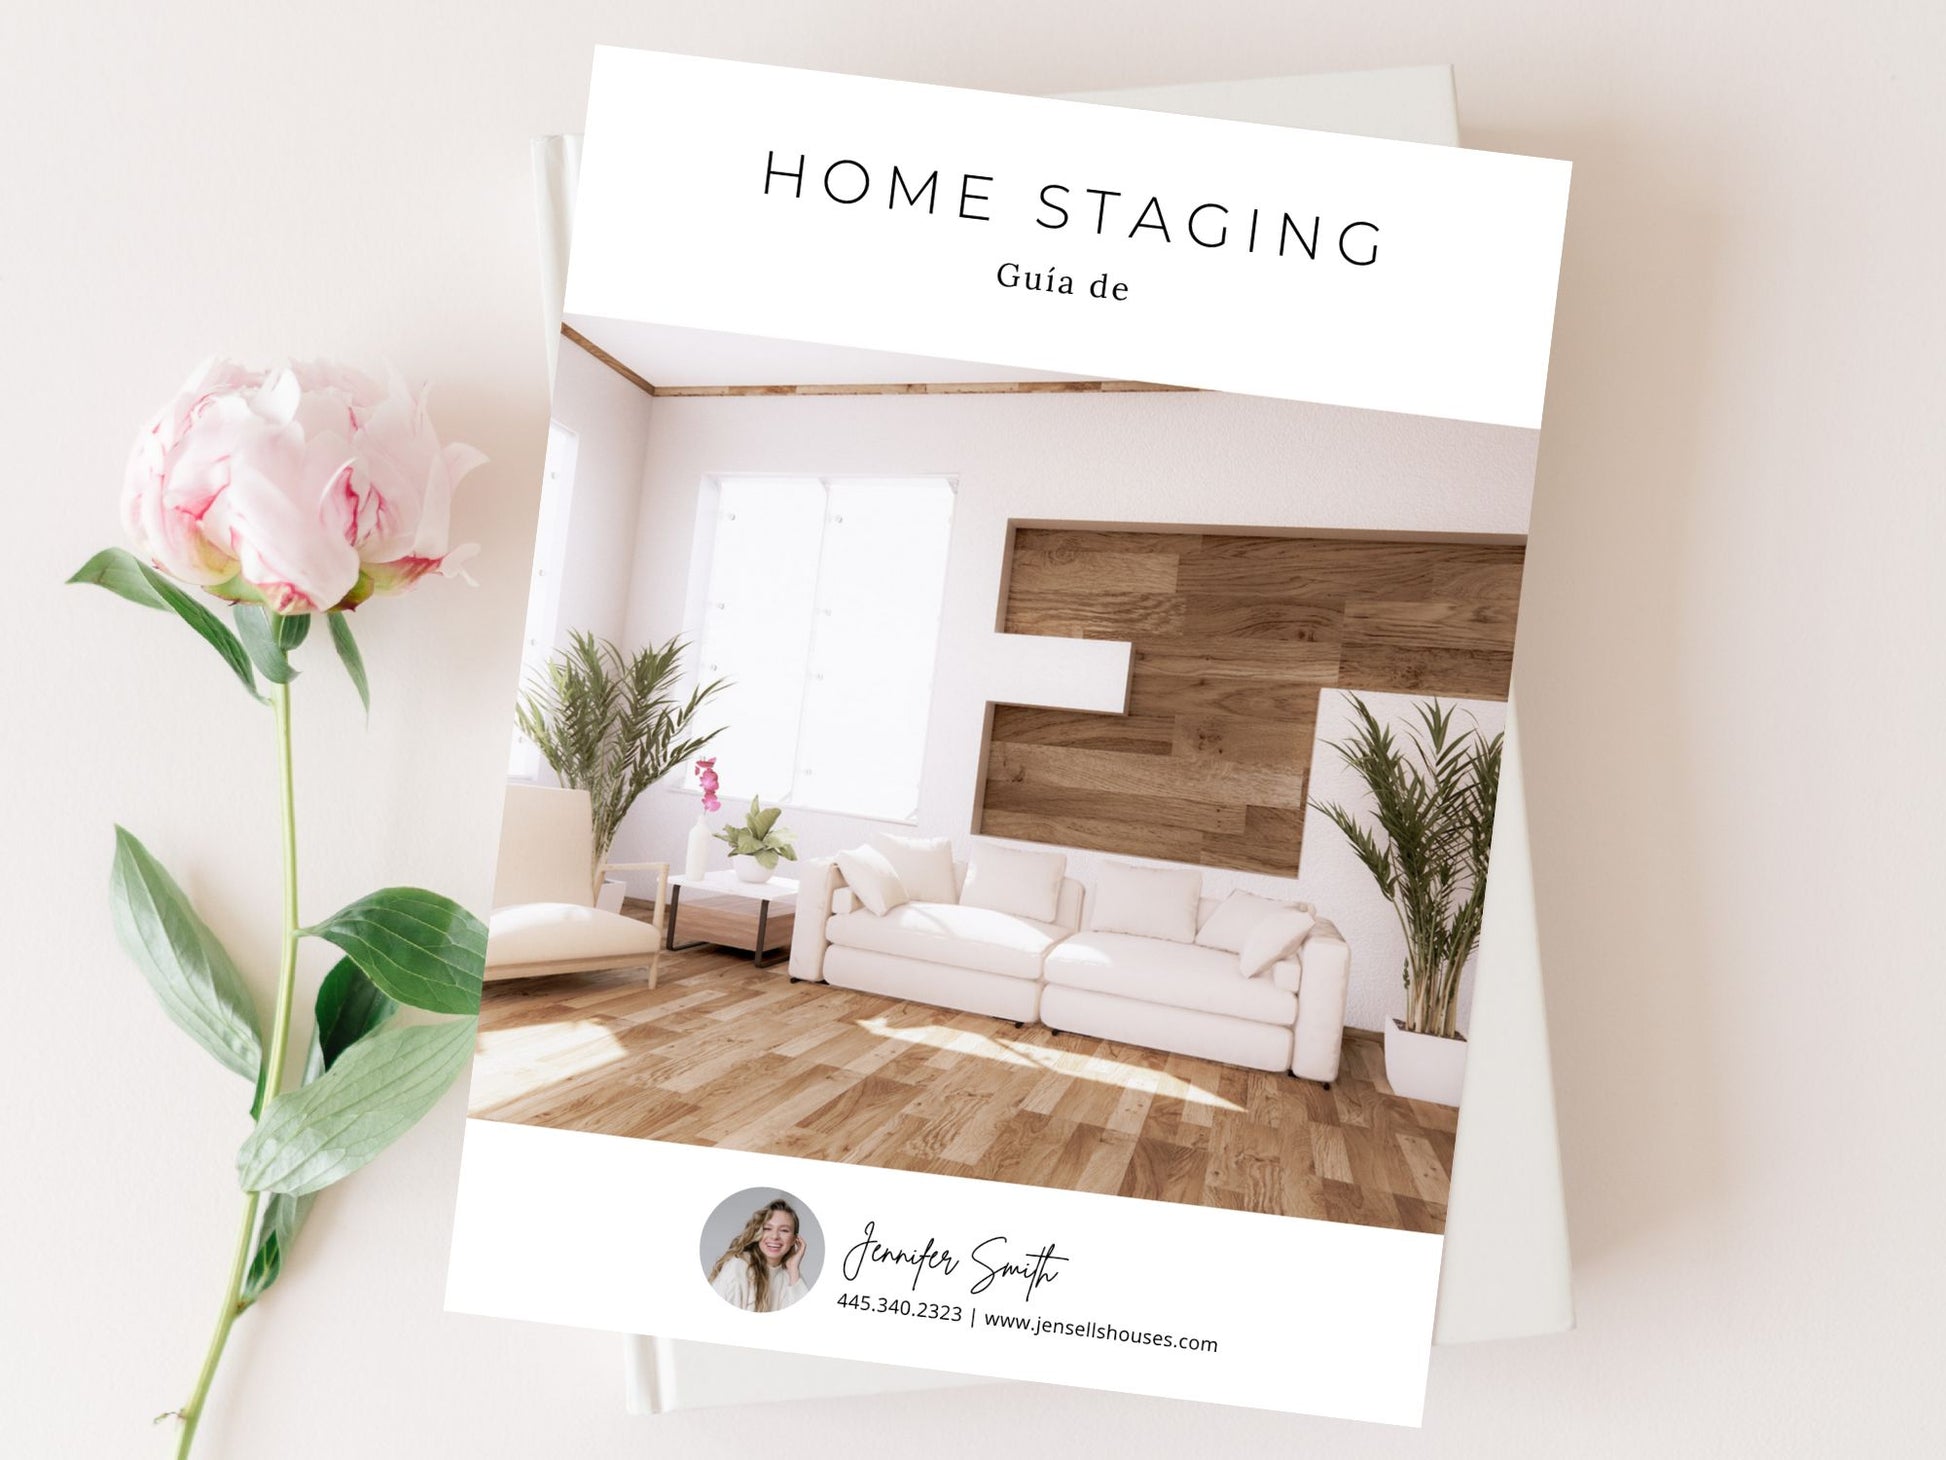 Spanish Minimal Staging Guide - Guide in Spanish designed to showcase the best features of your home in a minimal and attractive way.